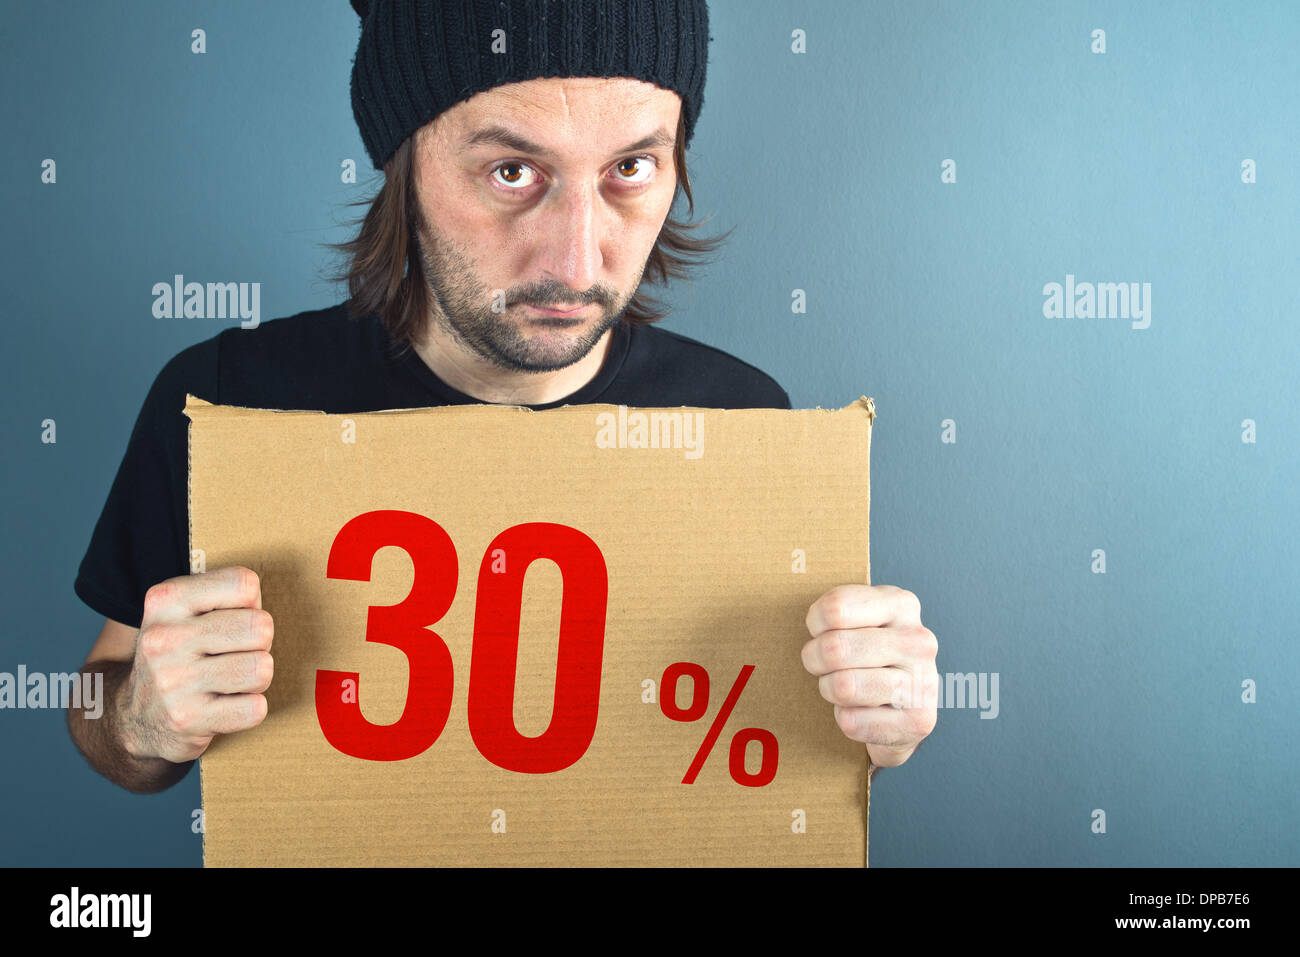 Man holding cardboard paper with thirty percent sales discount price. Consumerism concept, retail store promotion. Stock Photo